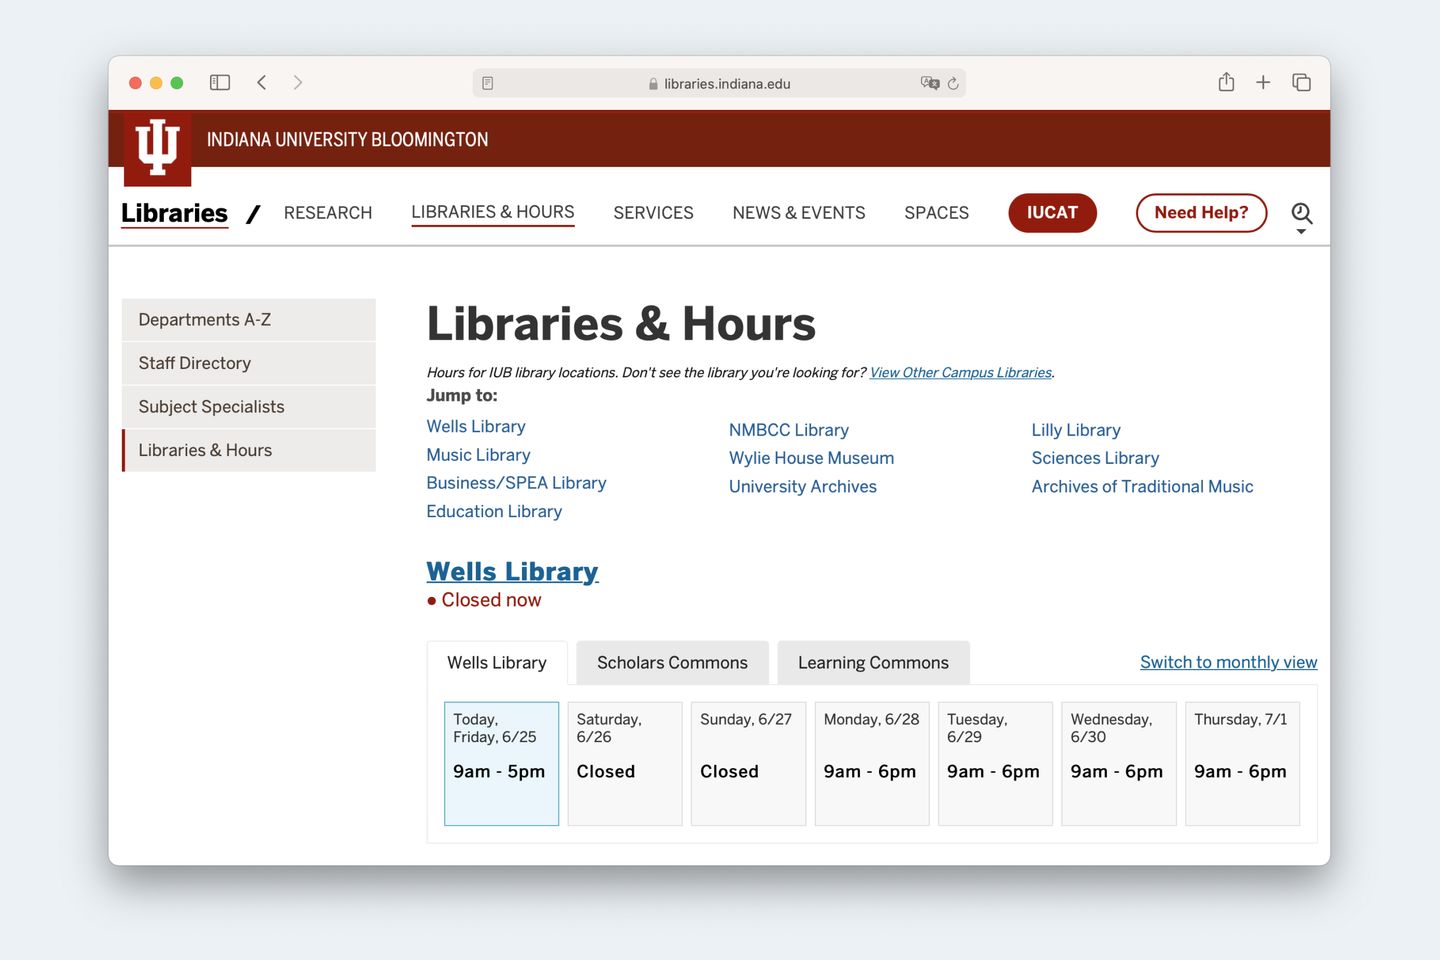 Screenshot of the Indiana University Bloomington’s libraries & hours page